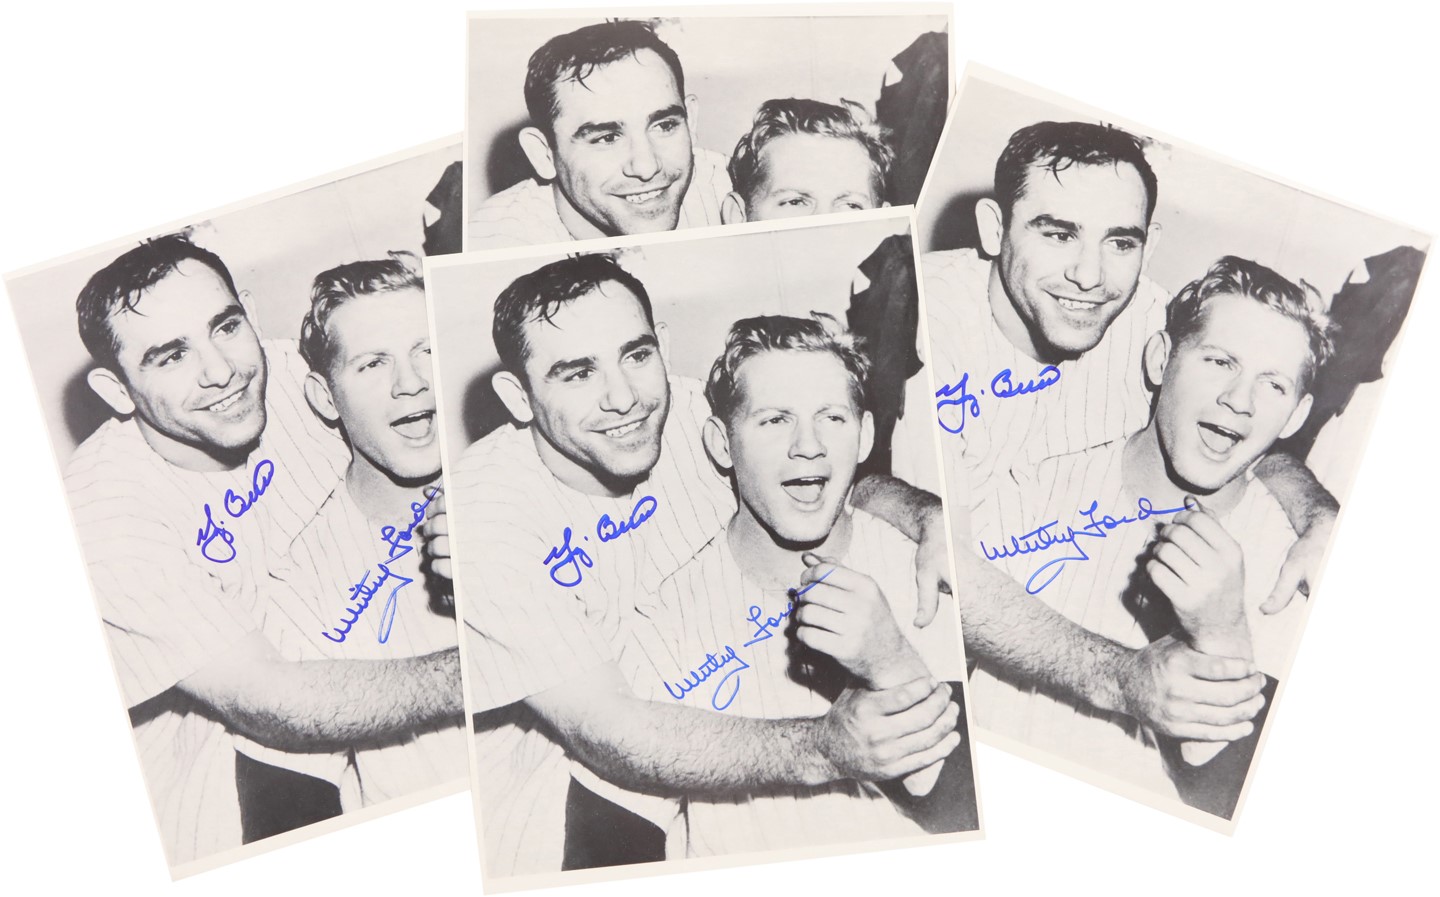 - Whitey Ford and Yogi Berra Signed Photographs from The Whitey Ford Collection (30)